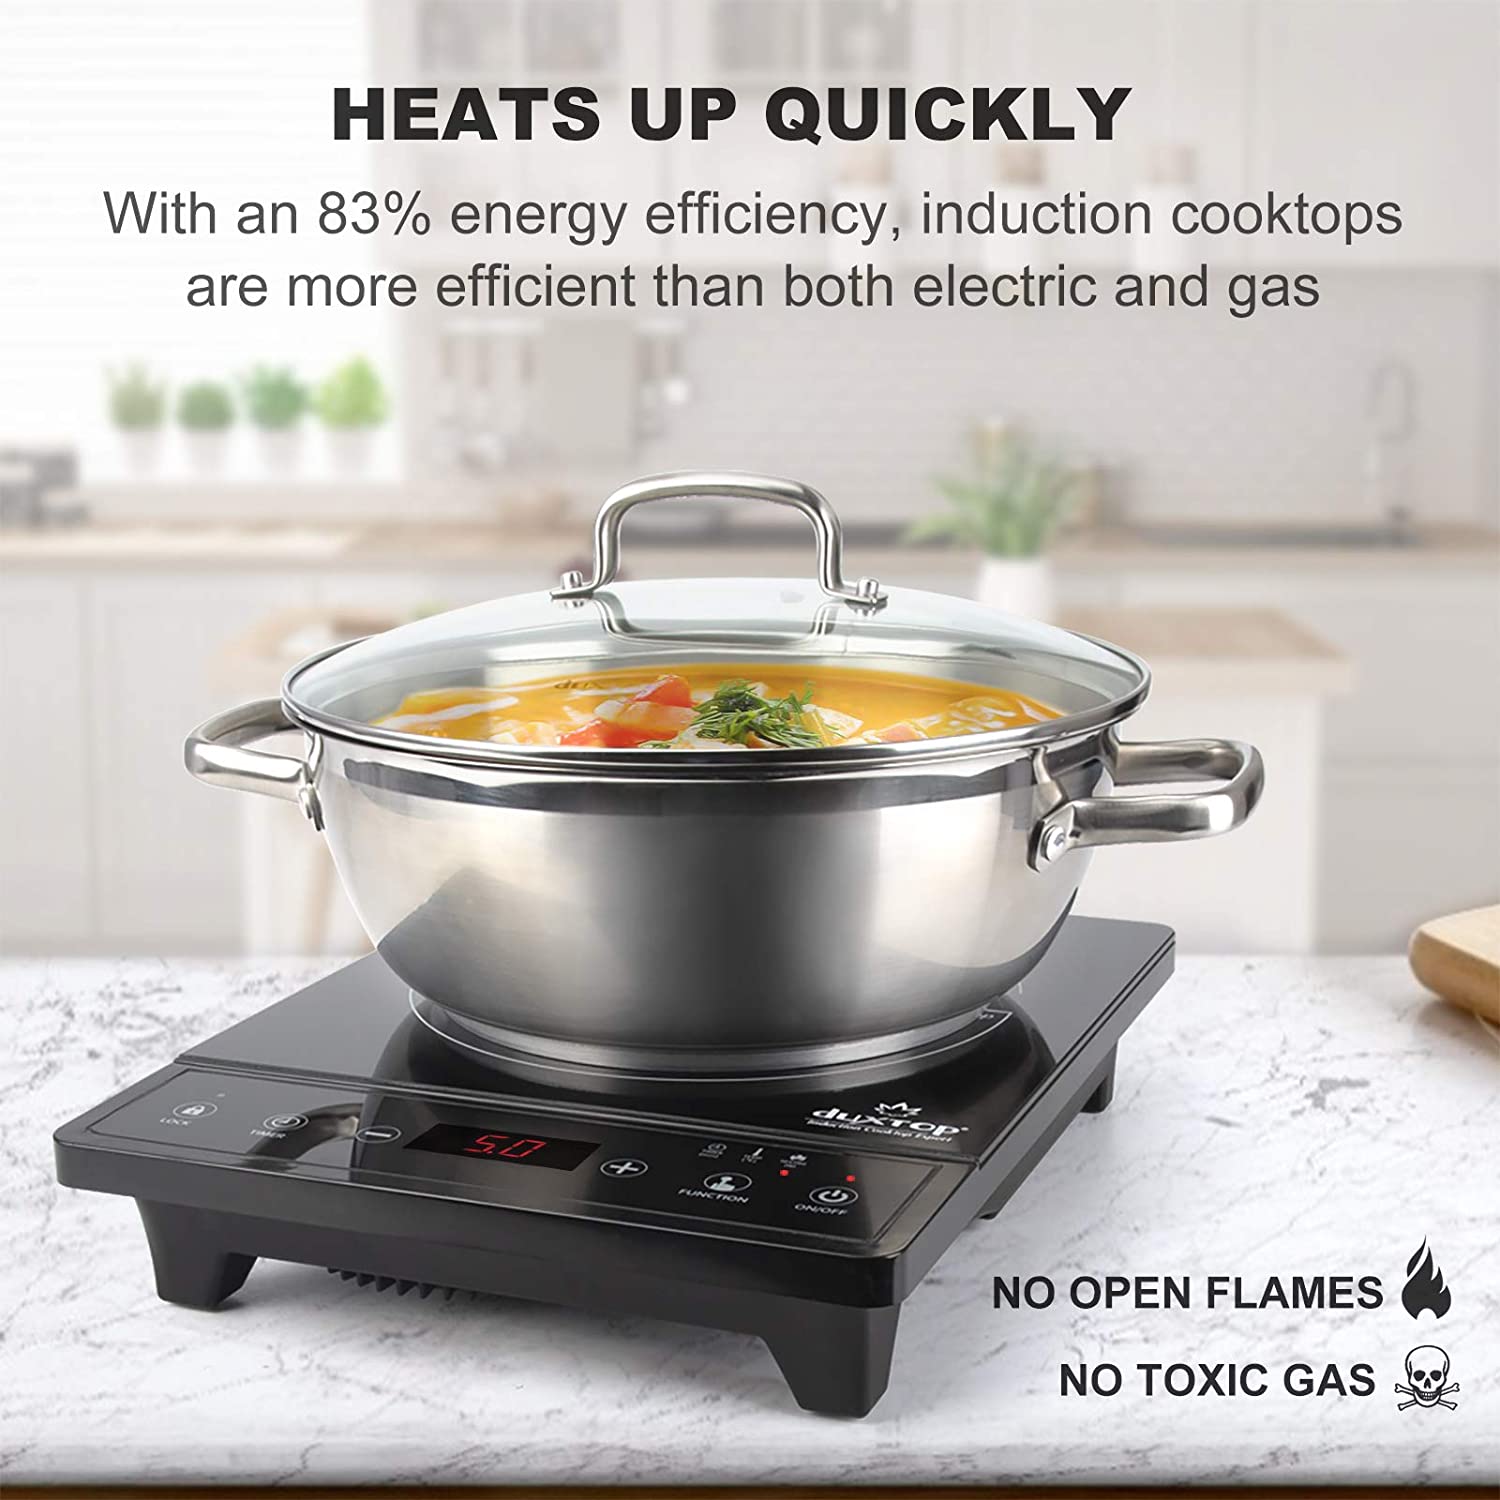 https://discounttoday.net/wp-content/uploads/2022/10/Duxtop-Portable-Induction-Cooktop-Countertop-Burner-Induction-Burner-with-Timer-and-Sensor-Touch-1800W-8500ST-E210C22.jpg